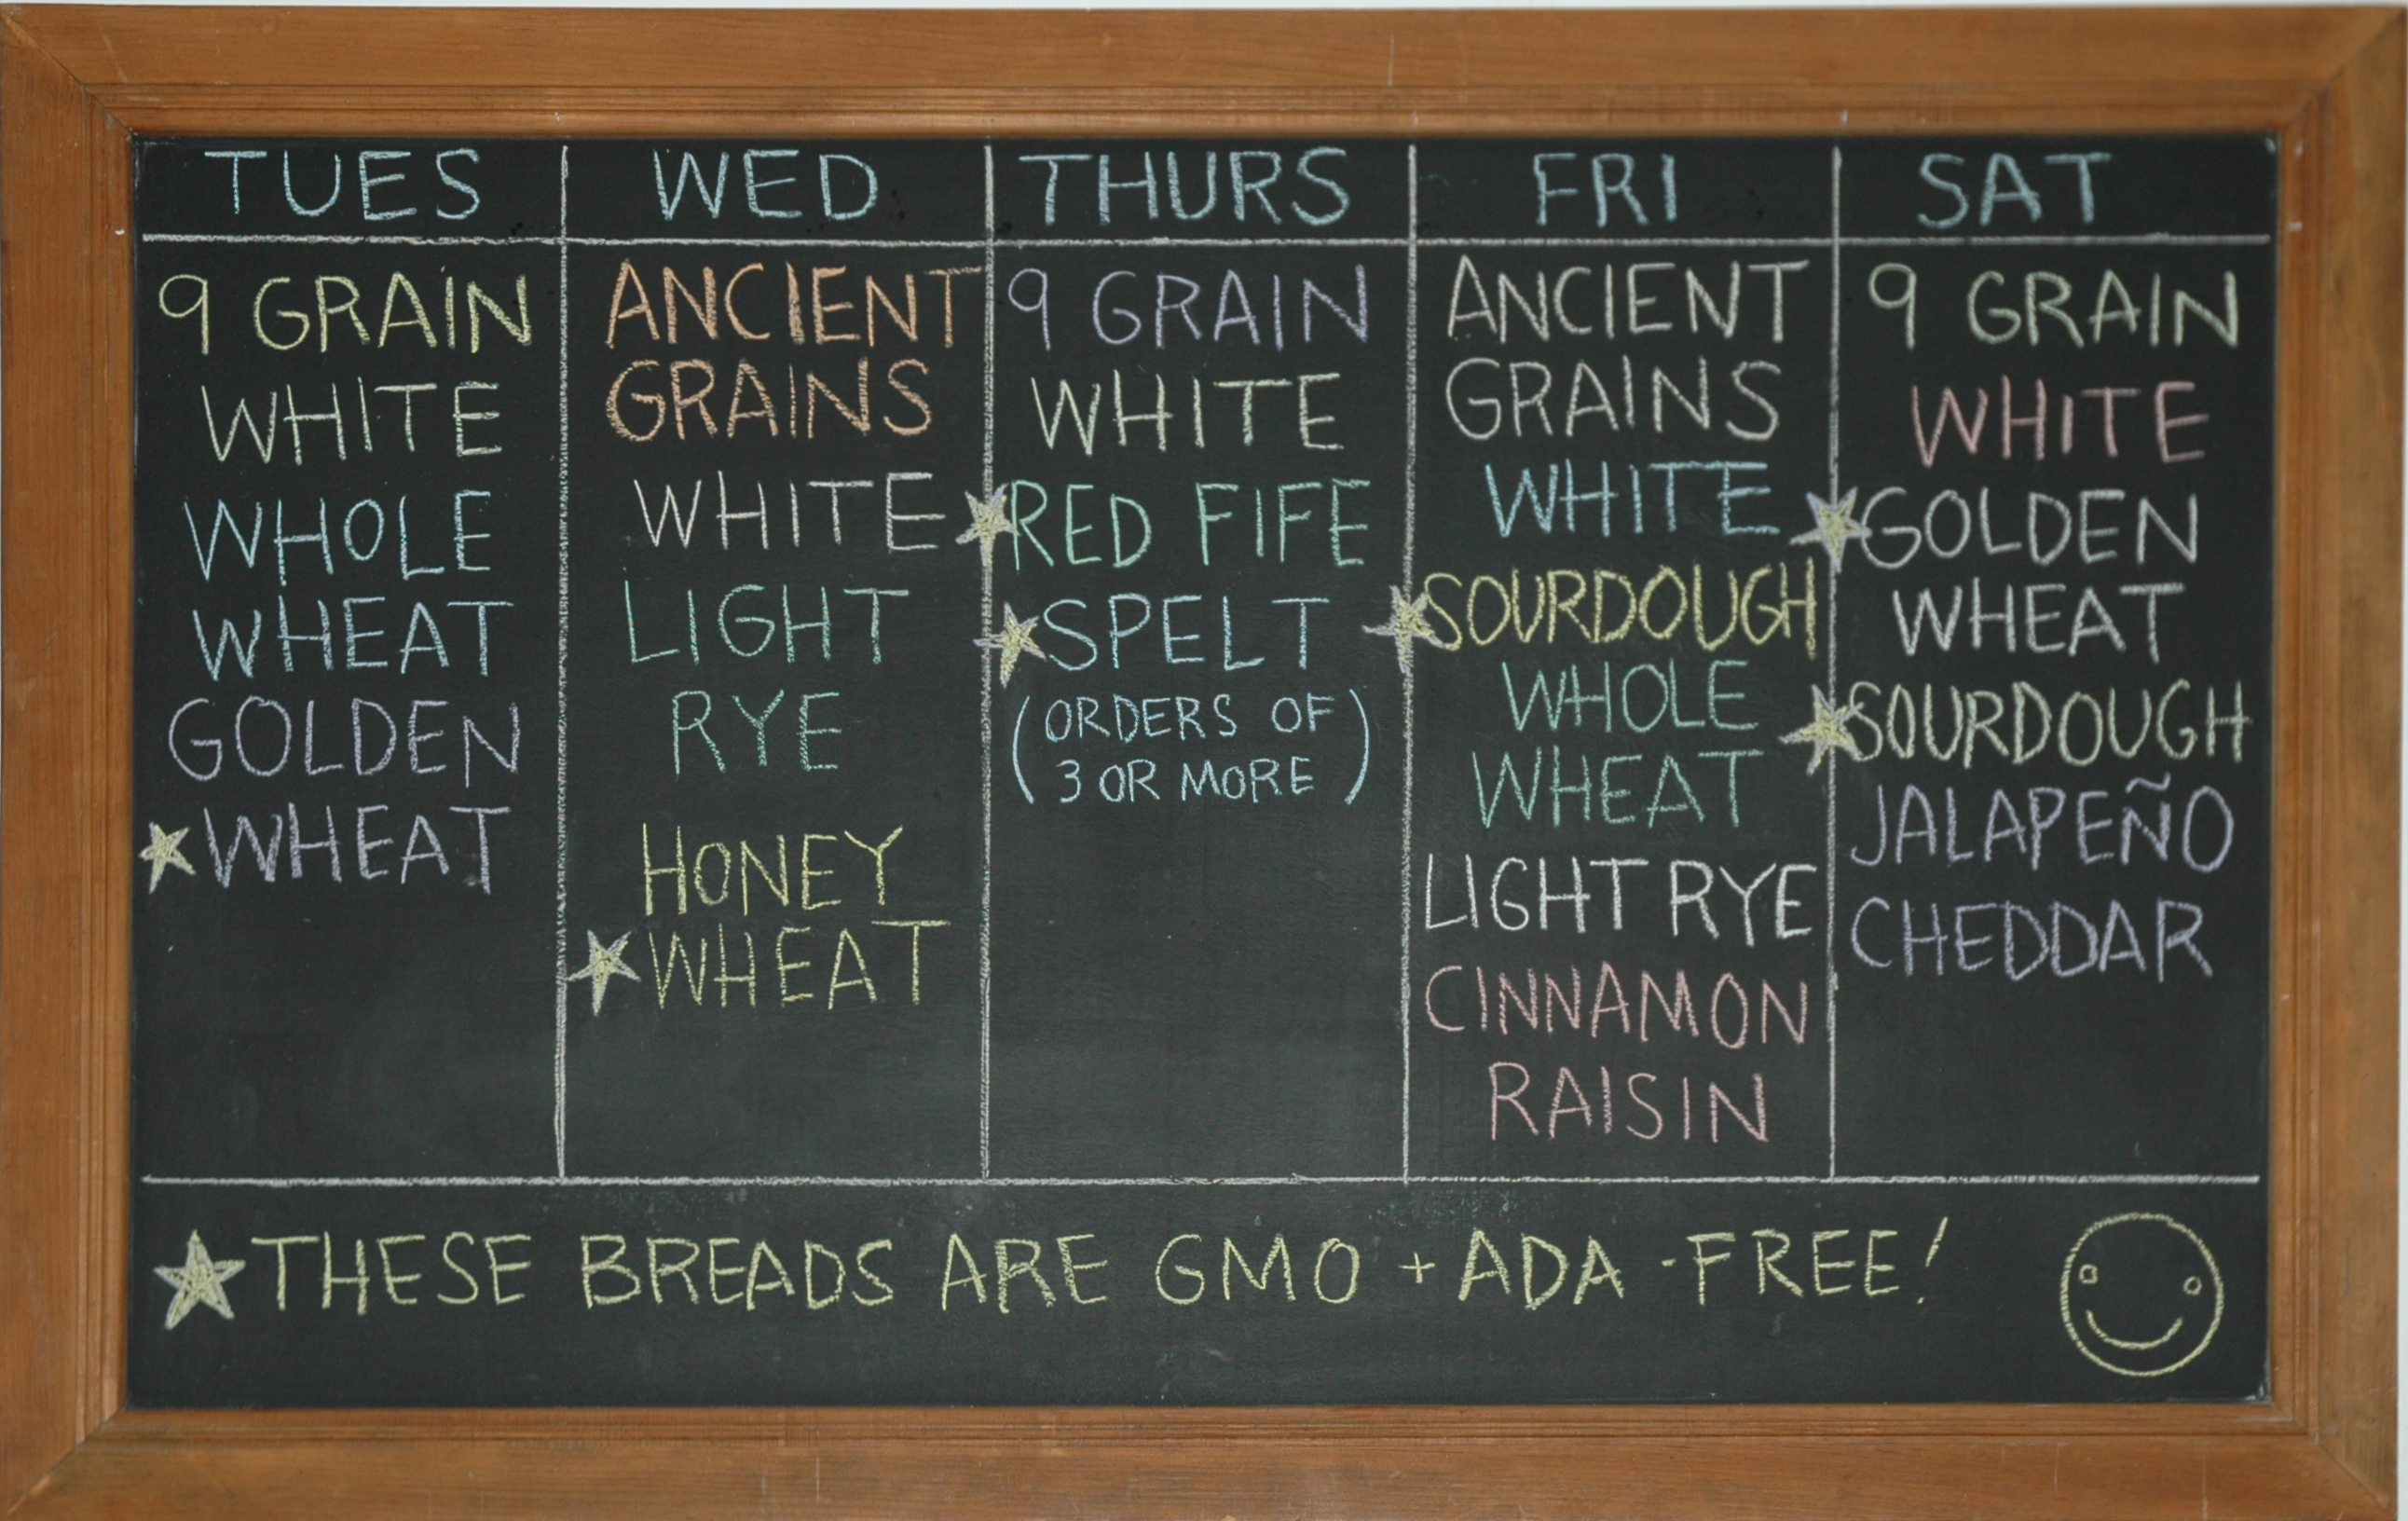 Weekly Bread Schedule for The Bakery